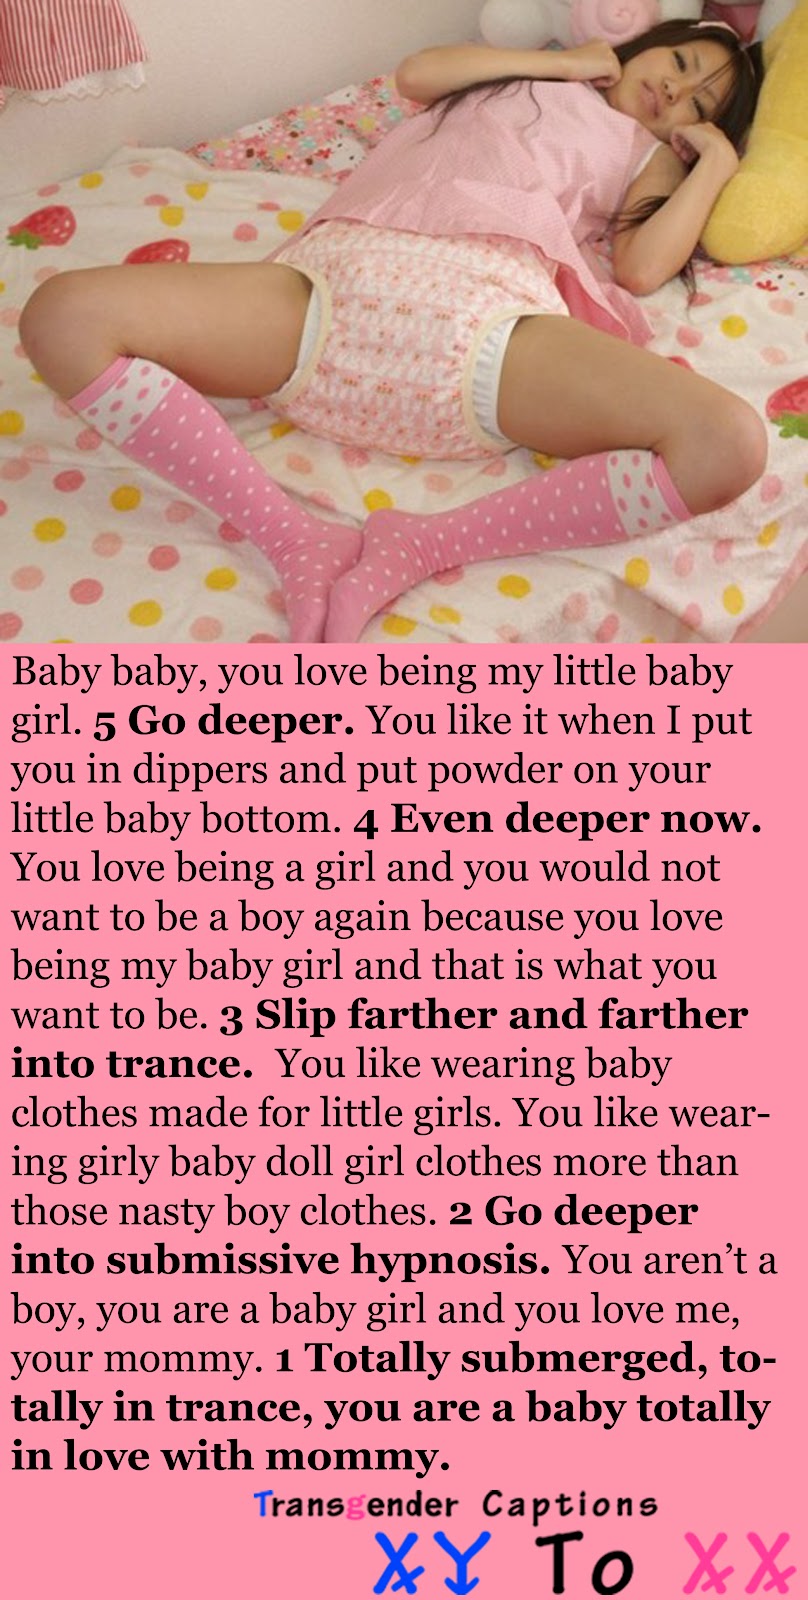 chelsie beebe recommends sissy baby humiliated captions pic